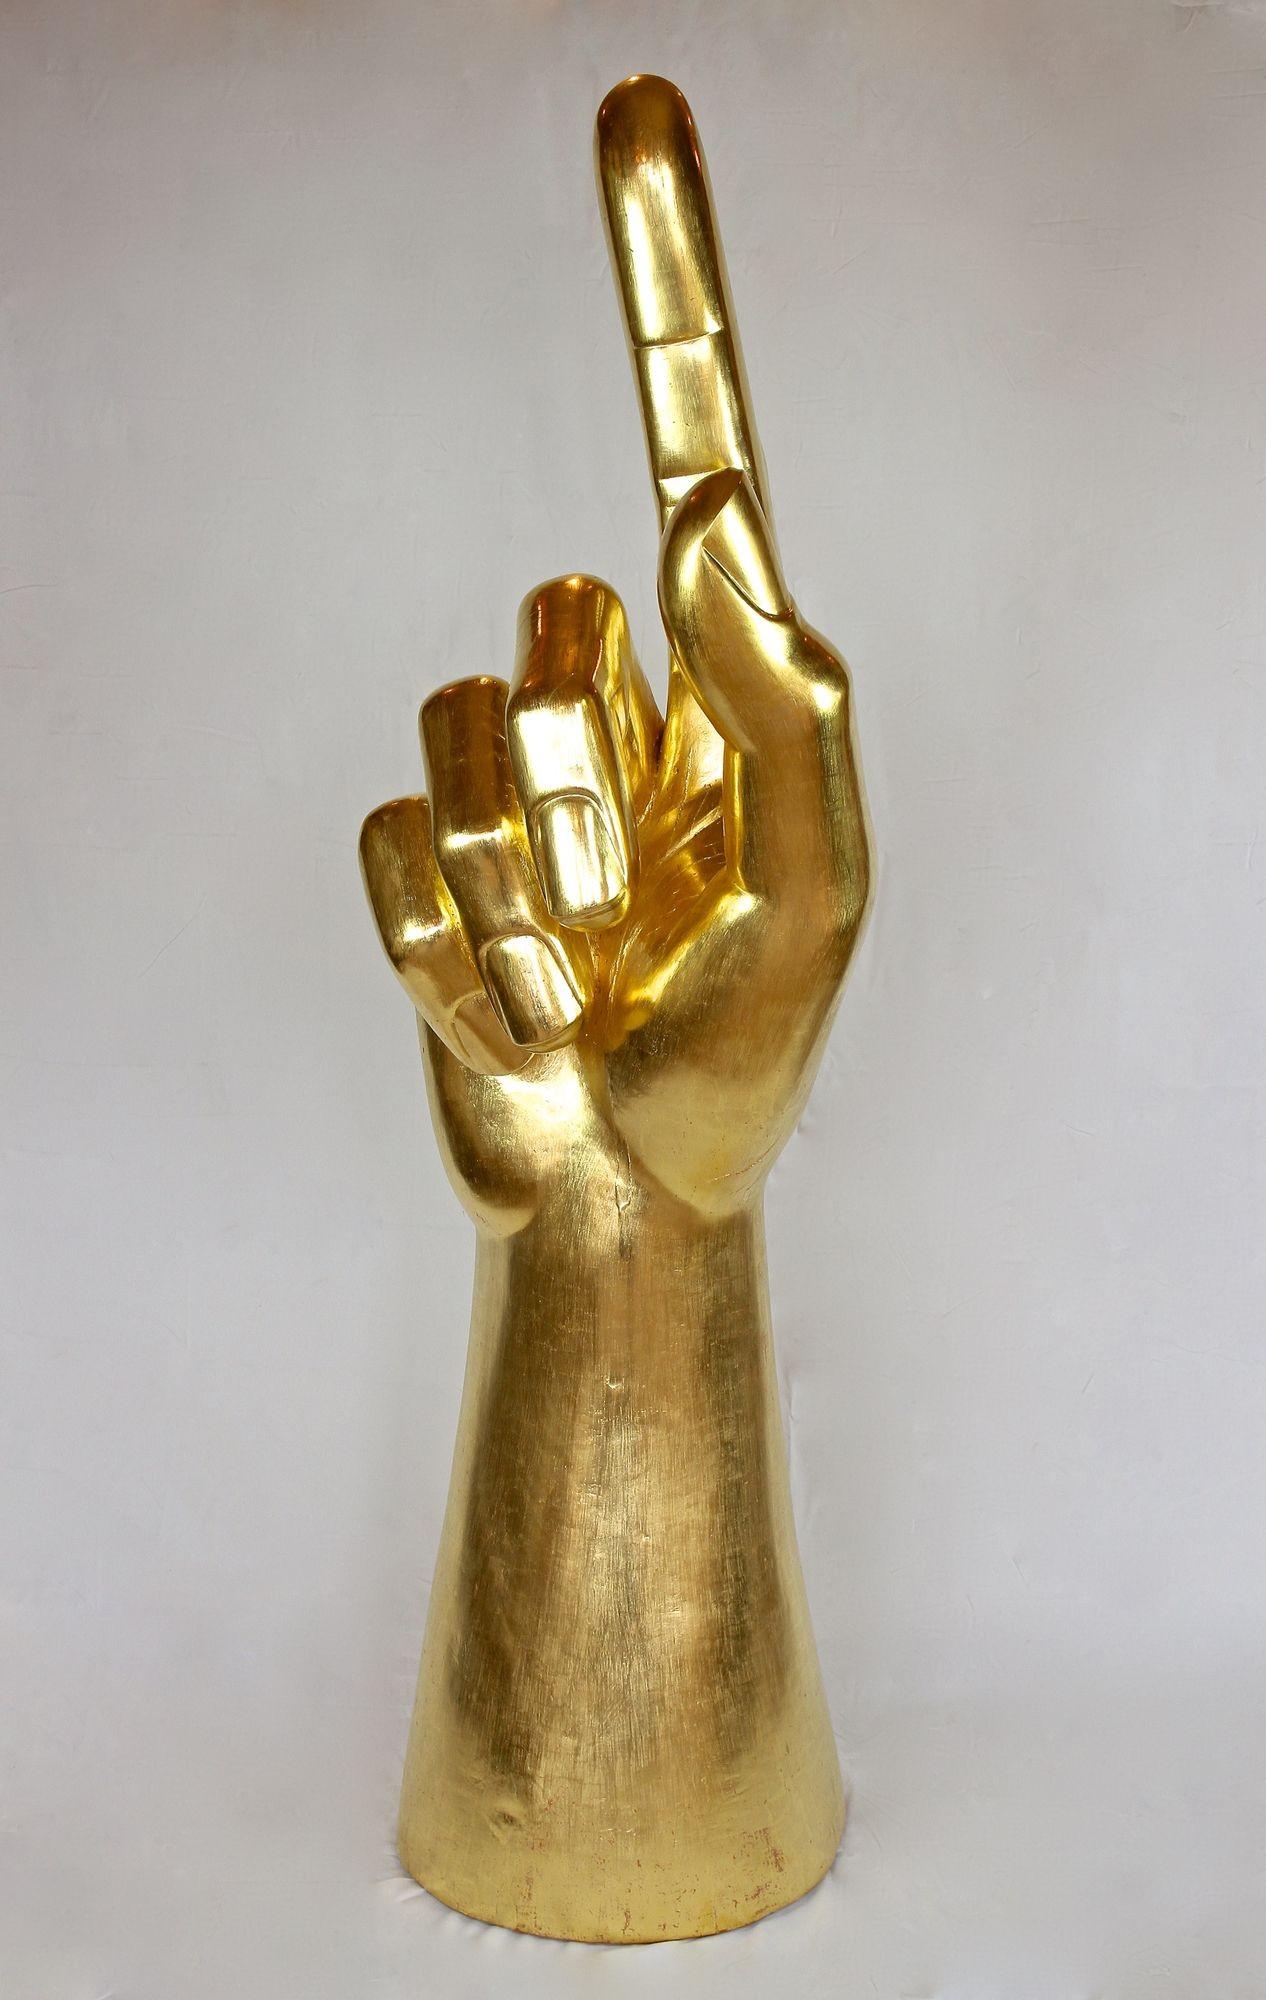 Contemporary Gigantic Hand Sculpture Goldleaf Plated by M. Treml, Austria, 2021 For Sale